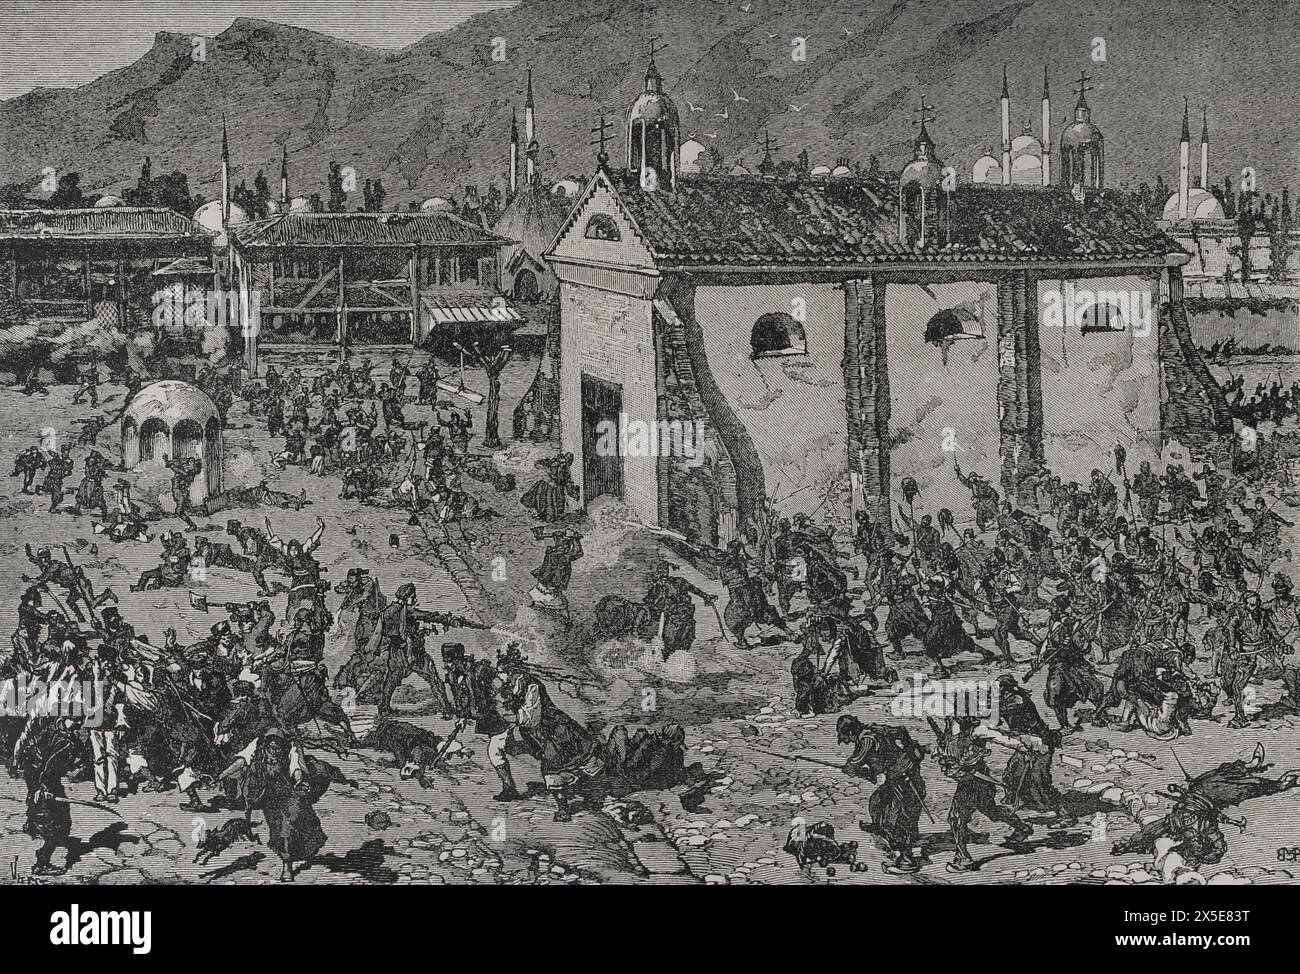 Russo-Turkish War (1877-1878). Yeni-Zaghra. Slaughter of Bulgarians executed by the Turks on 15 July 1877. Engraving. 'La Guerra de Oriente' (The Russo-Turkish War). Volume I. 1877. Stock Photo